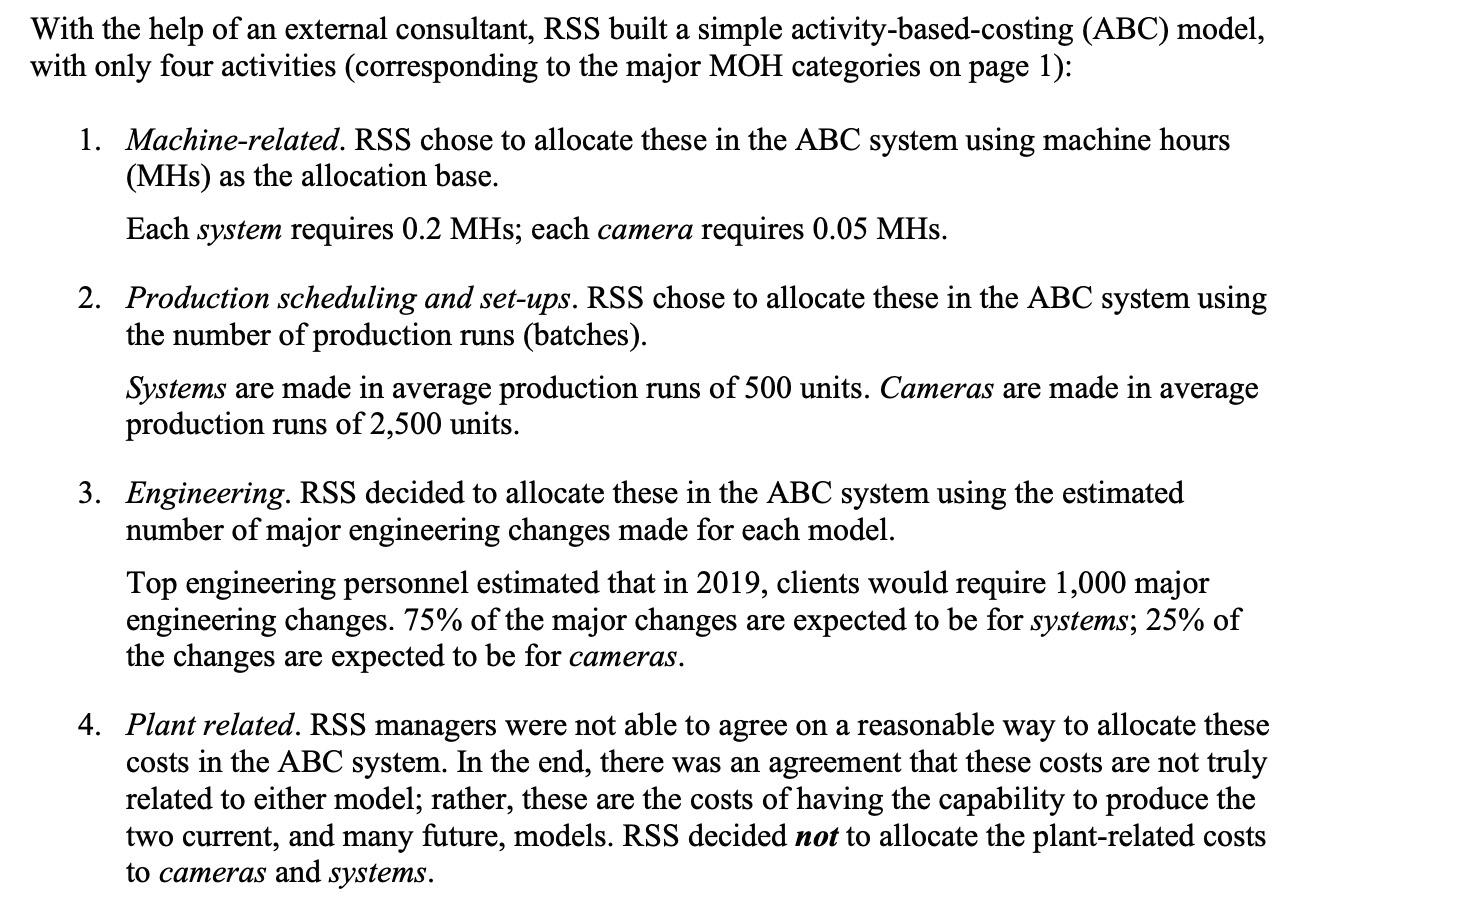 With the help of an external consultant, RSS built a simple activity-based-costing (ABC) model, with only four activities (co